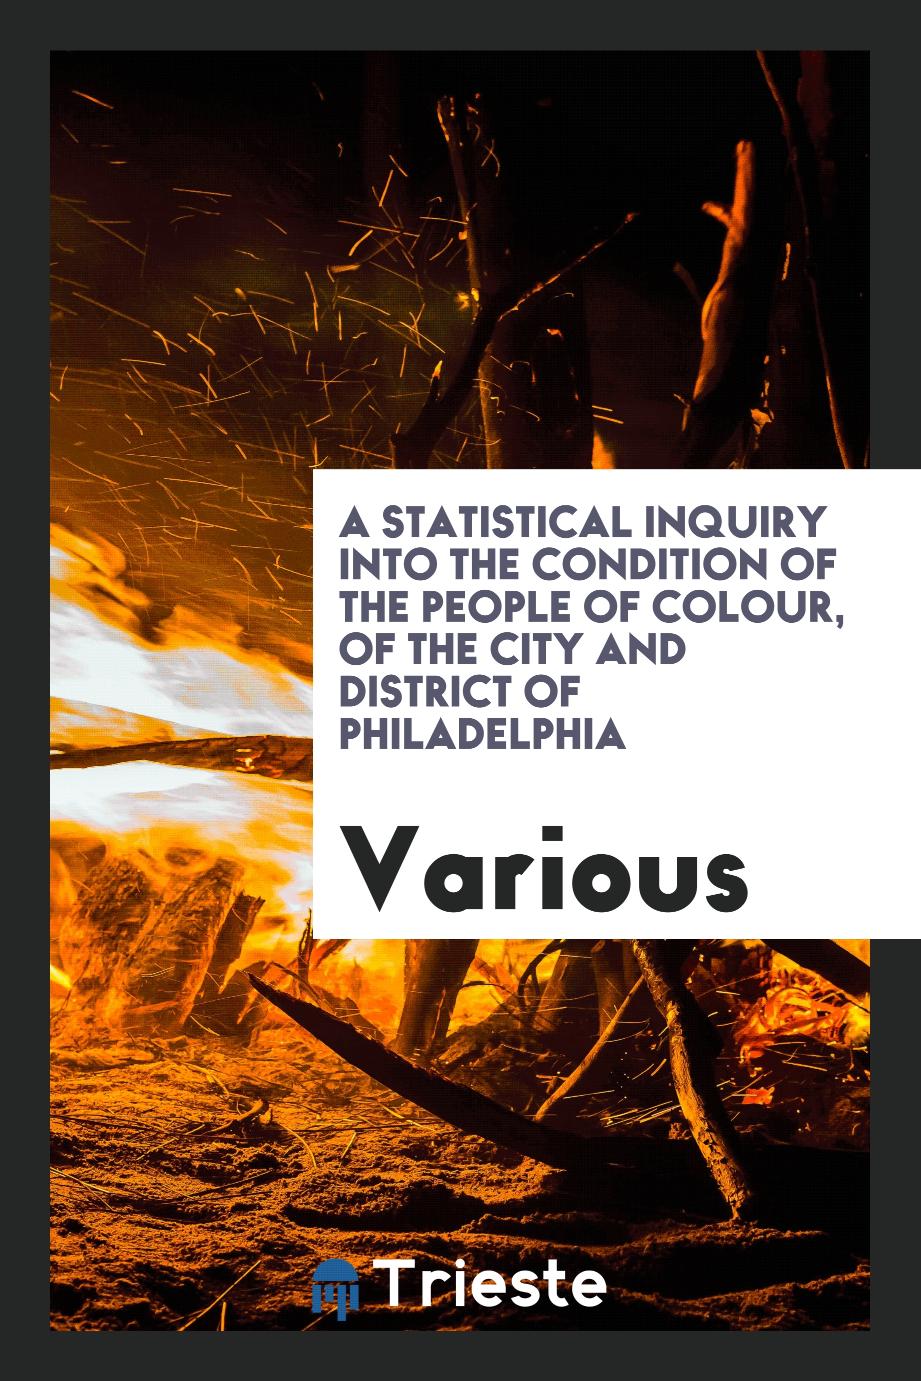 A Statistical Inquiry Into the Condition of the People of Colour, of the City and District of Philadelphia